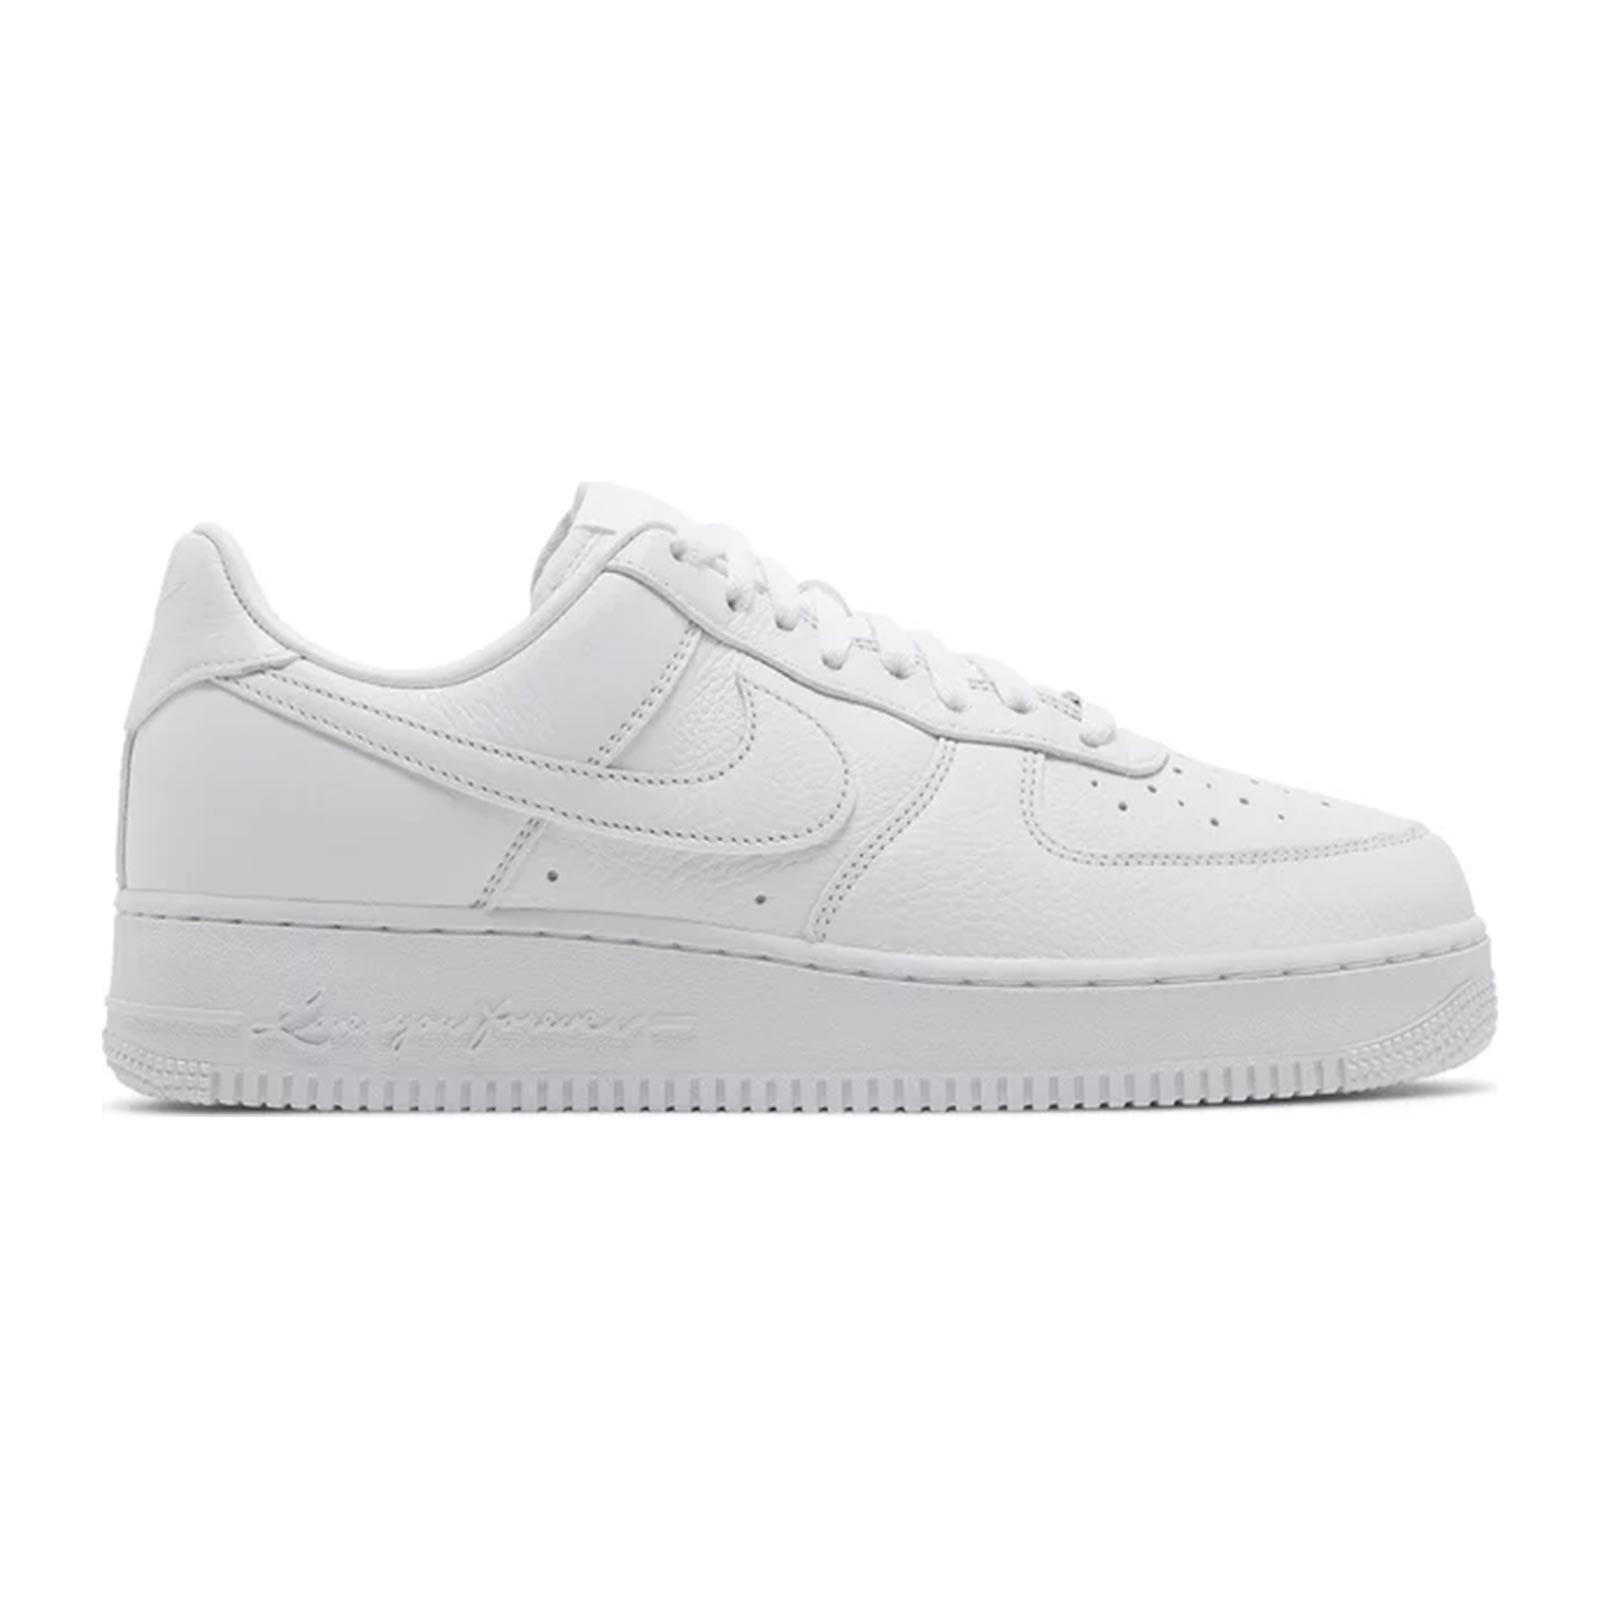 NOCTA x Air Force 1 Low, Certified Lover Boy